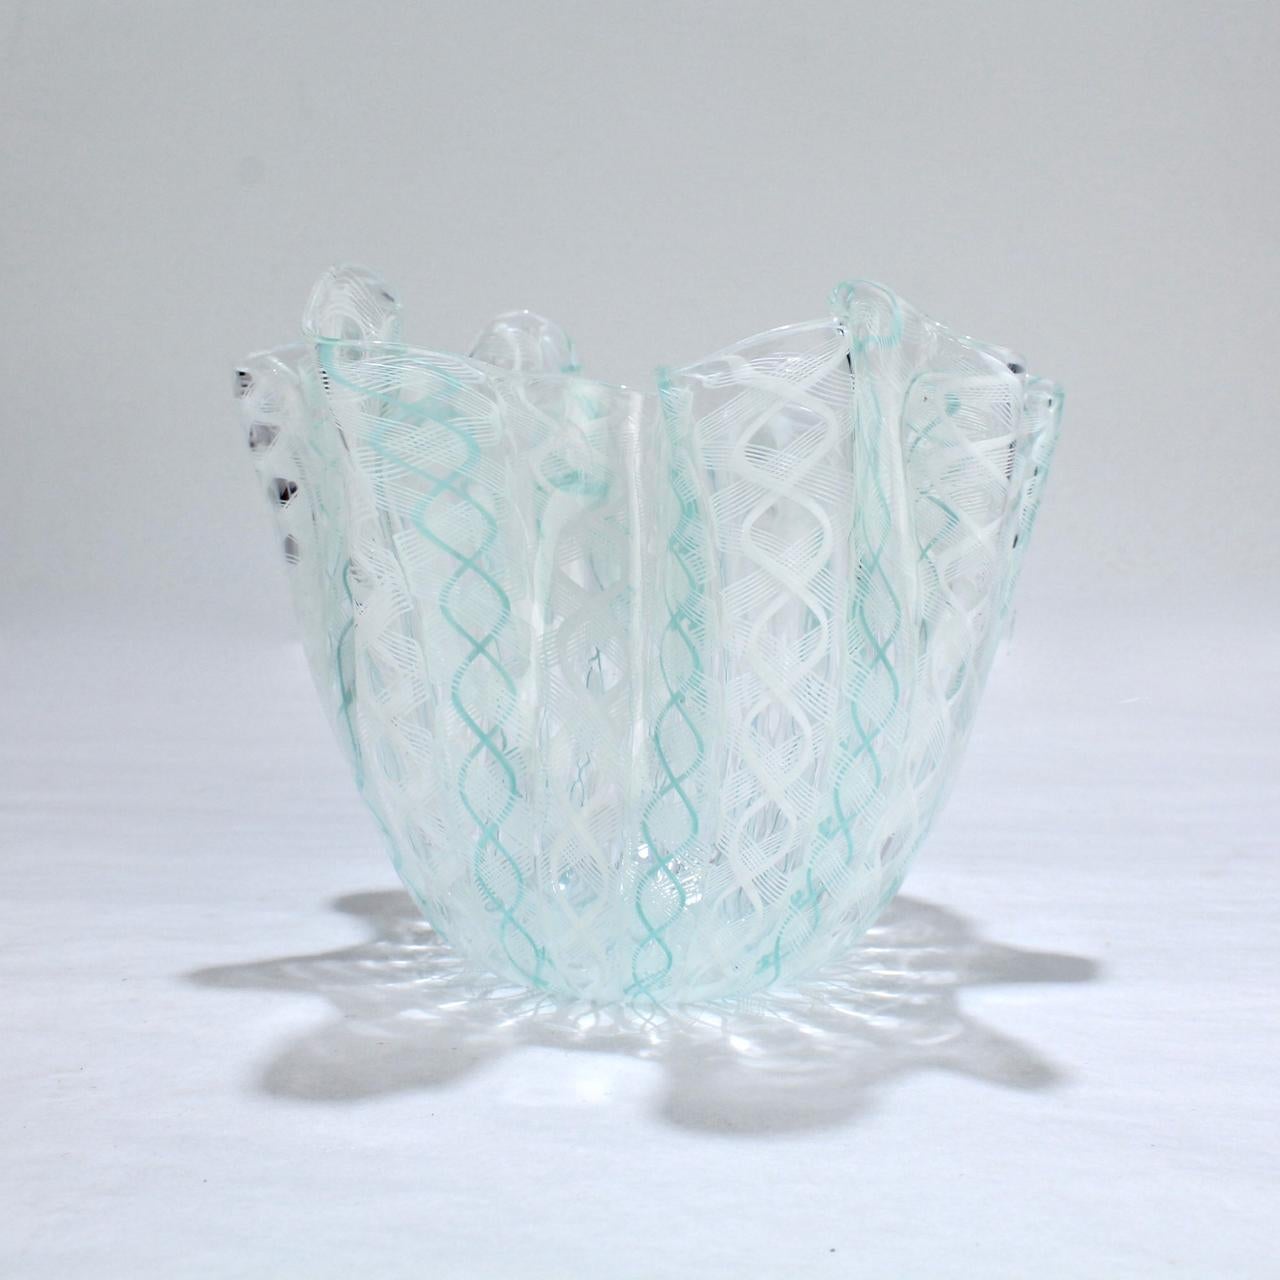 A fazzoletto or 'handkerchief' glass vase in teal green and white.

Designed by Fulvio Bianconi and Paolo Venini for Venini glass.

An iconic Mid-Century Modern form and an essential piece of Italian glass.

The base bears a 3 line acid-etched